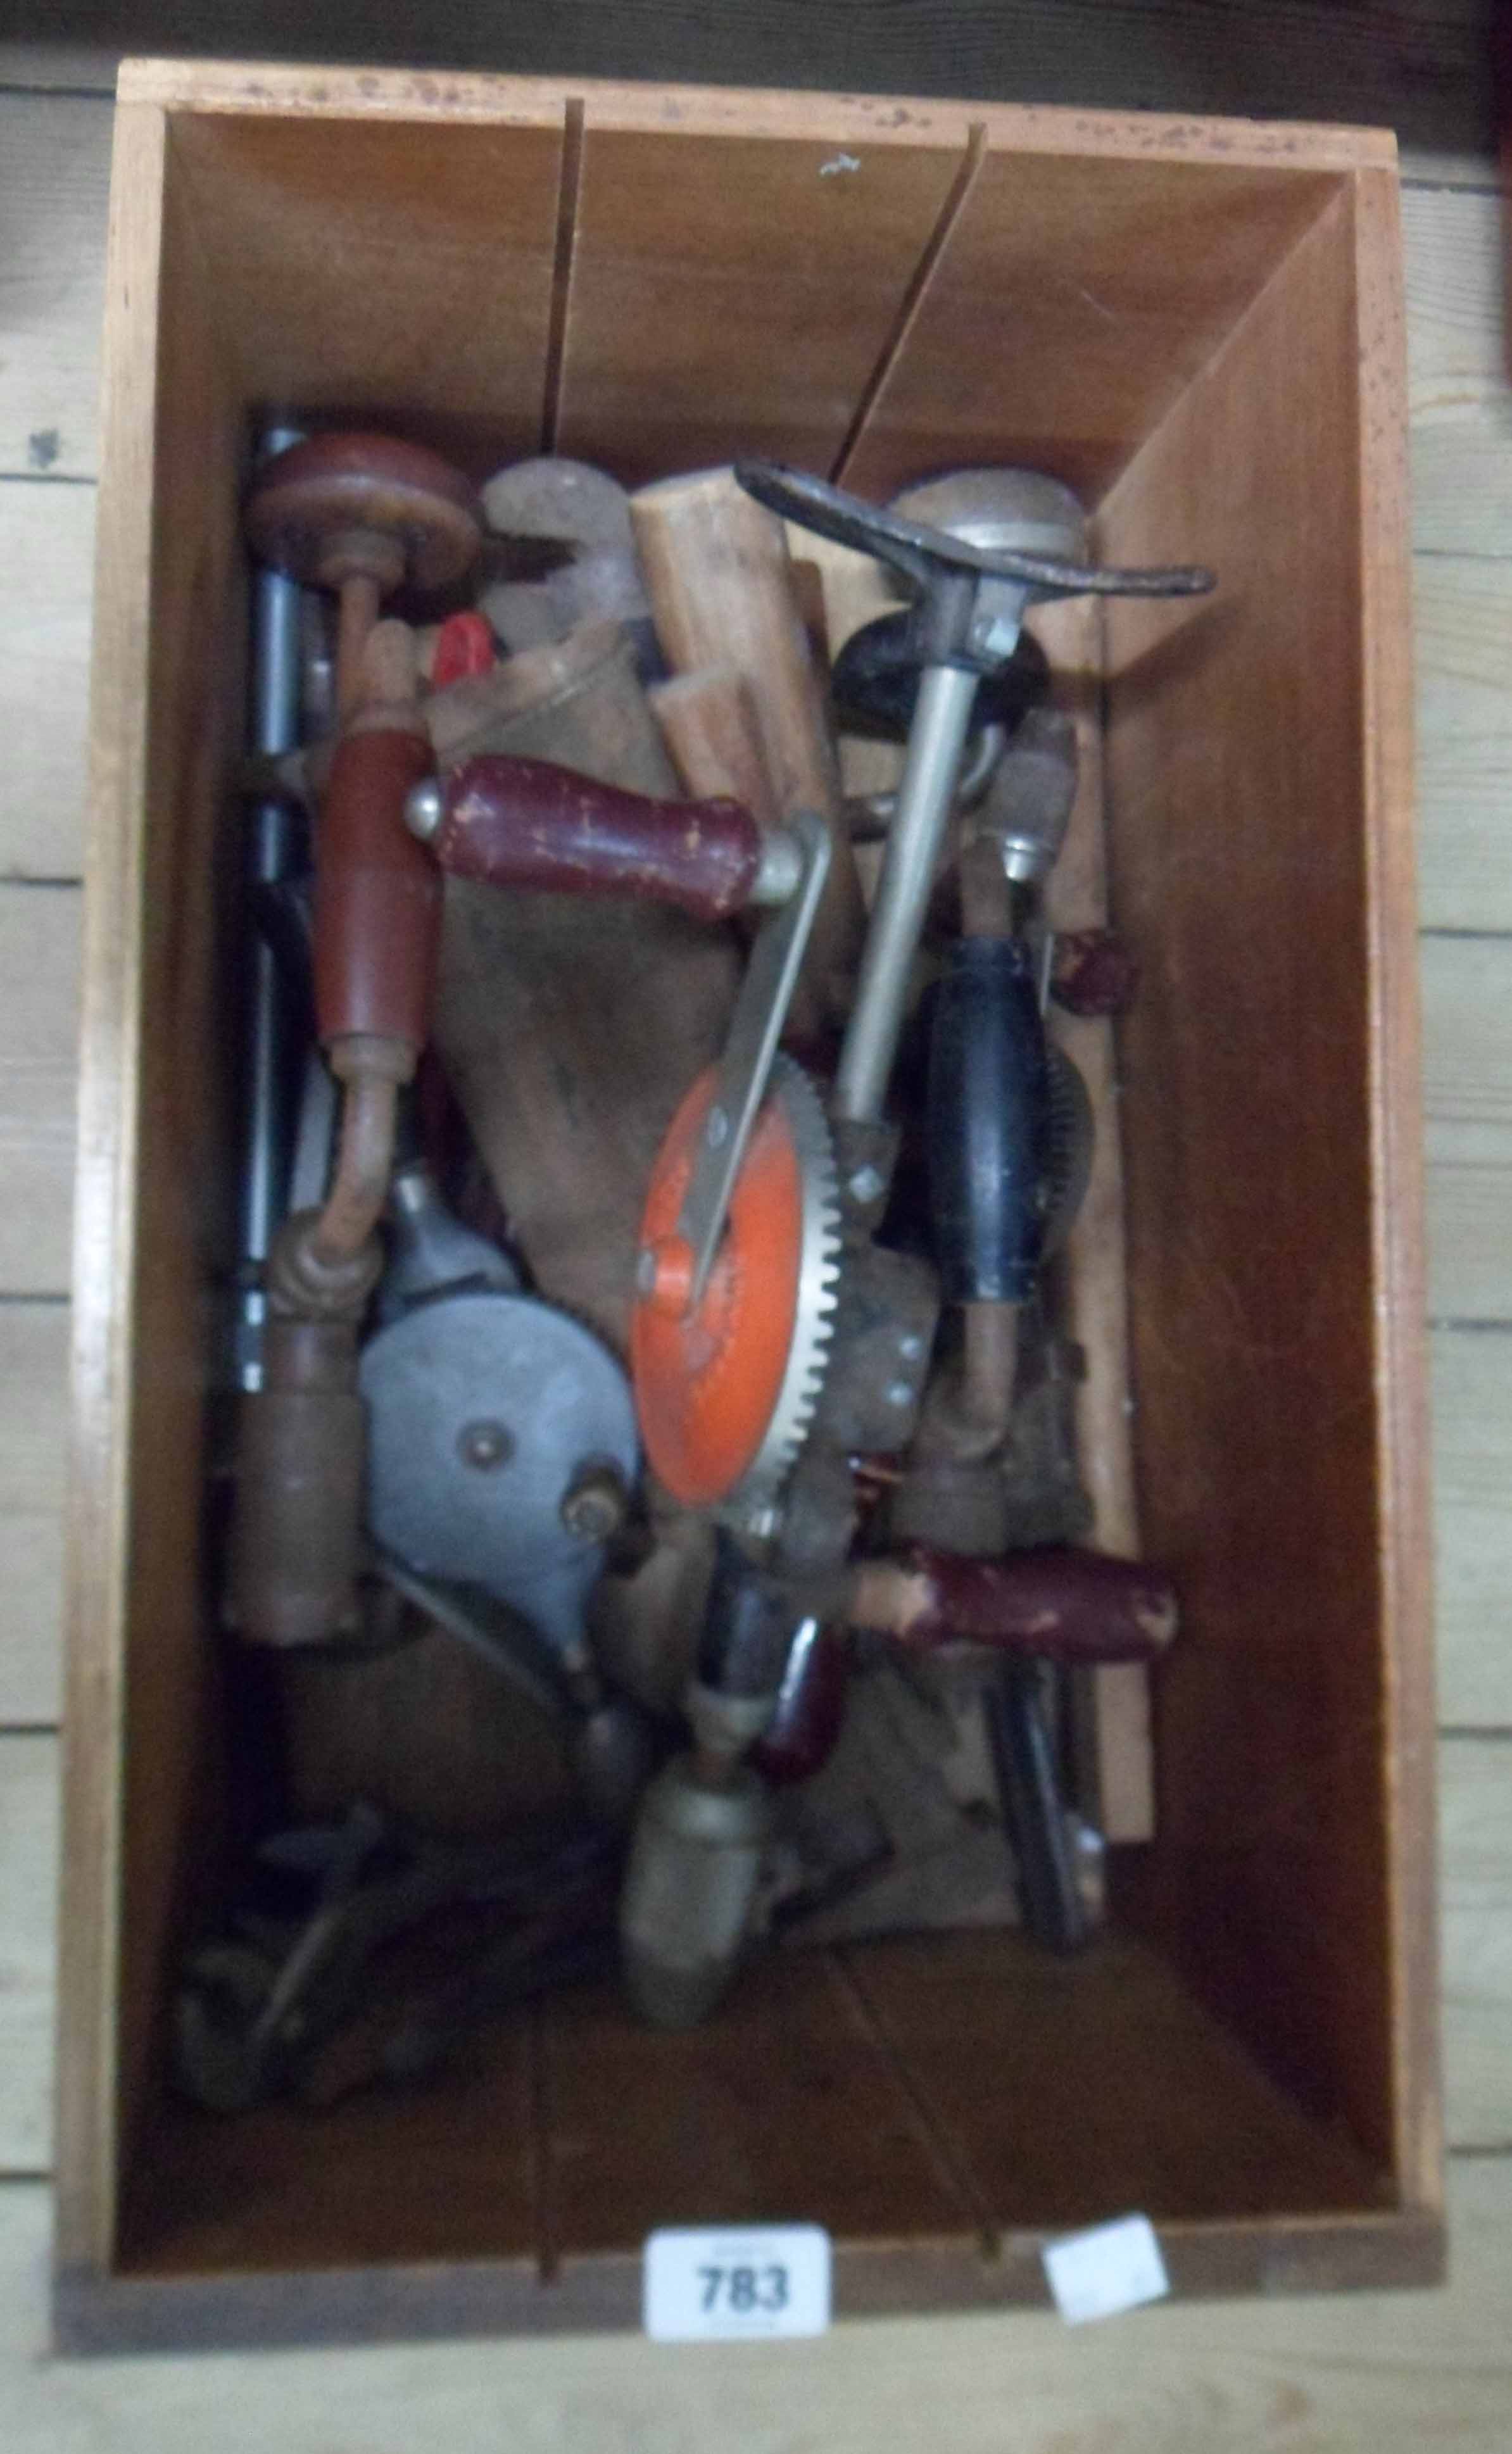 A drawer containing assorted tools including brace and bit, adjustable spanners, etc.